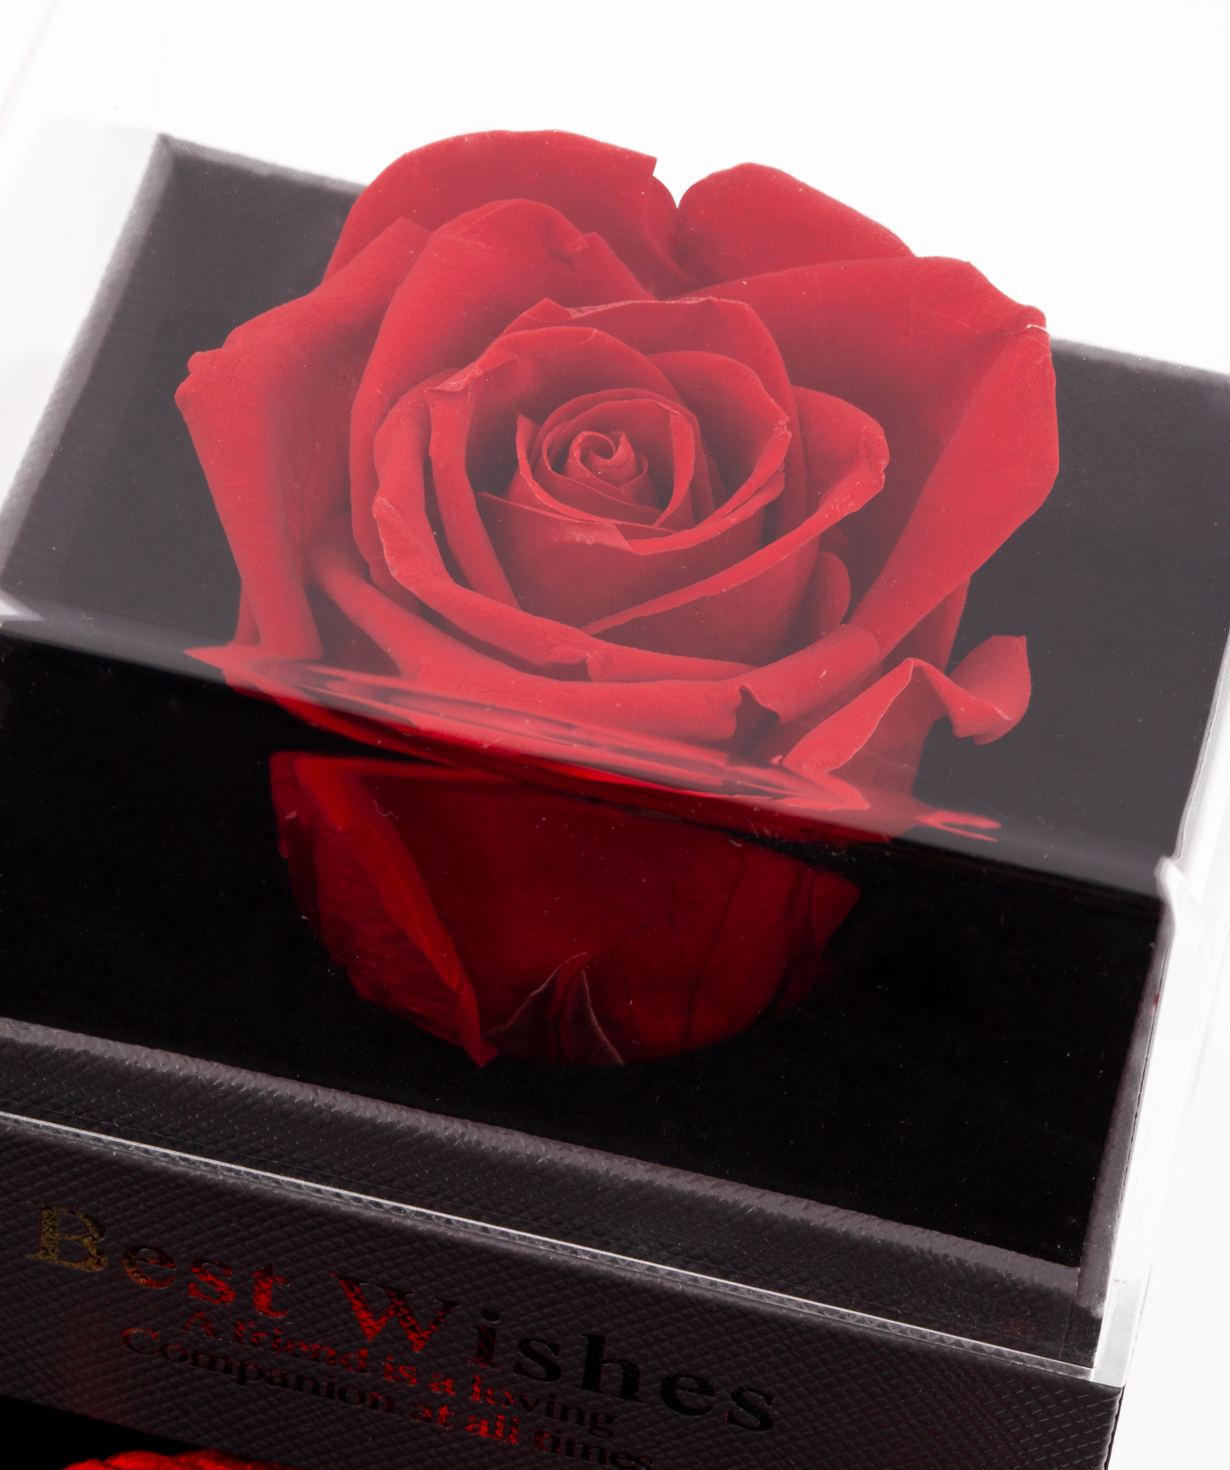 Rose `EM Flowers` eternal red with a talisman